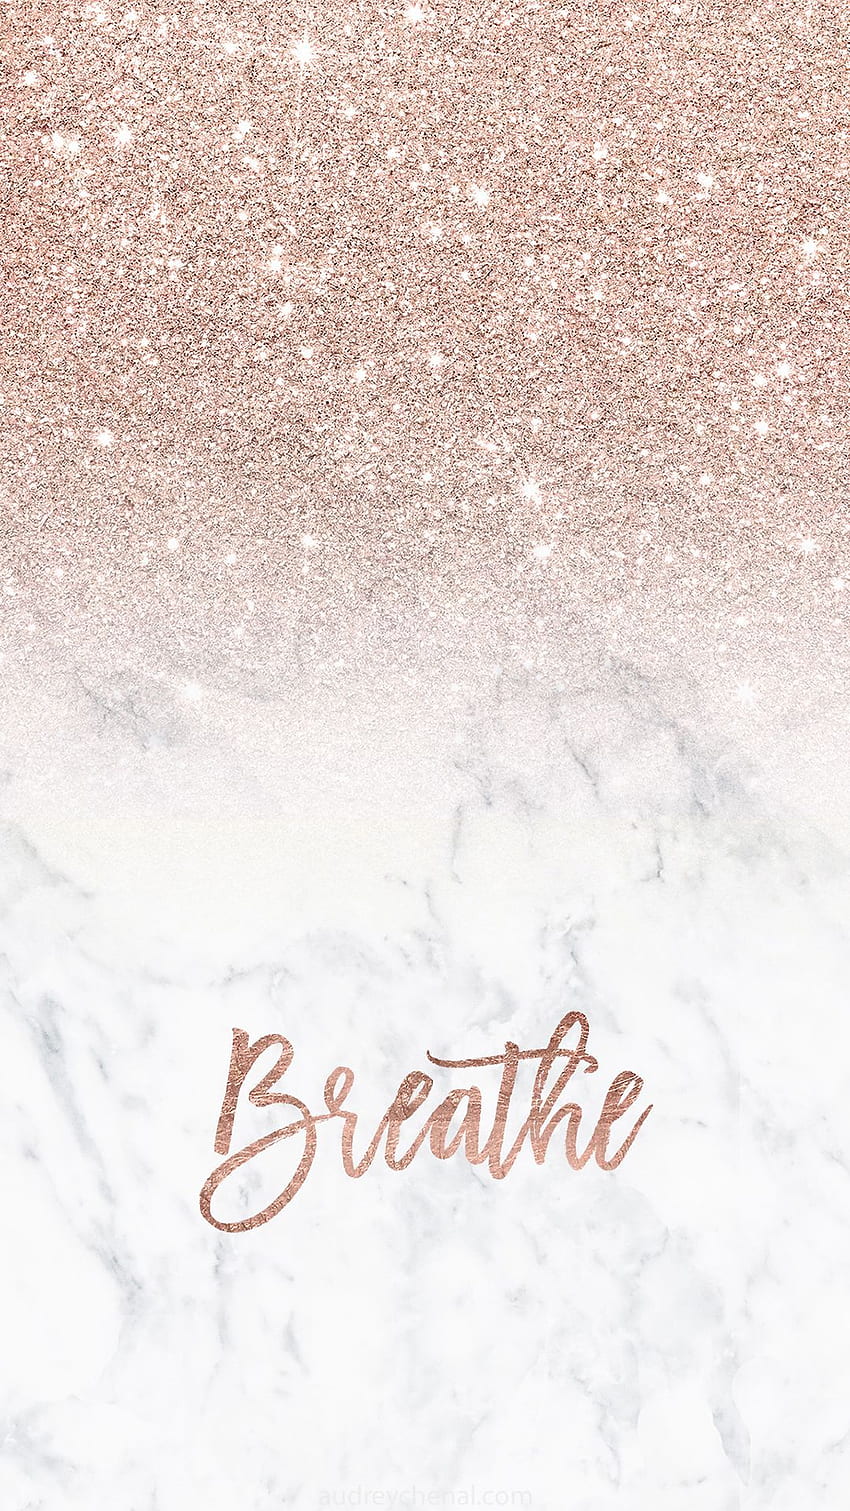 Rose Gold Wallpaper for iPhone  25 Gorgeous Backgrounds